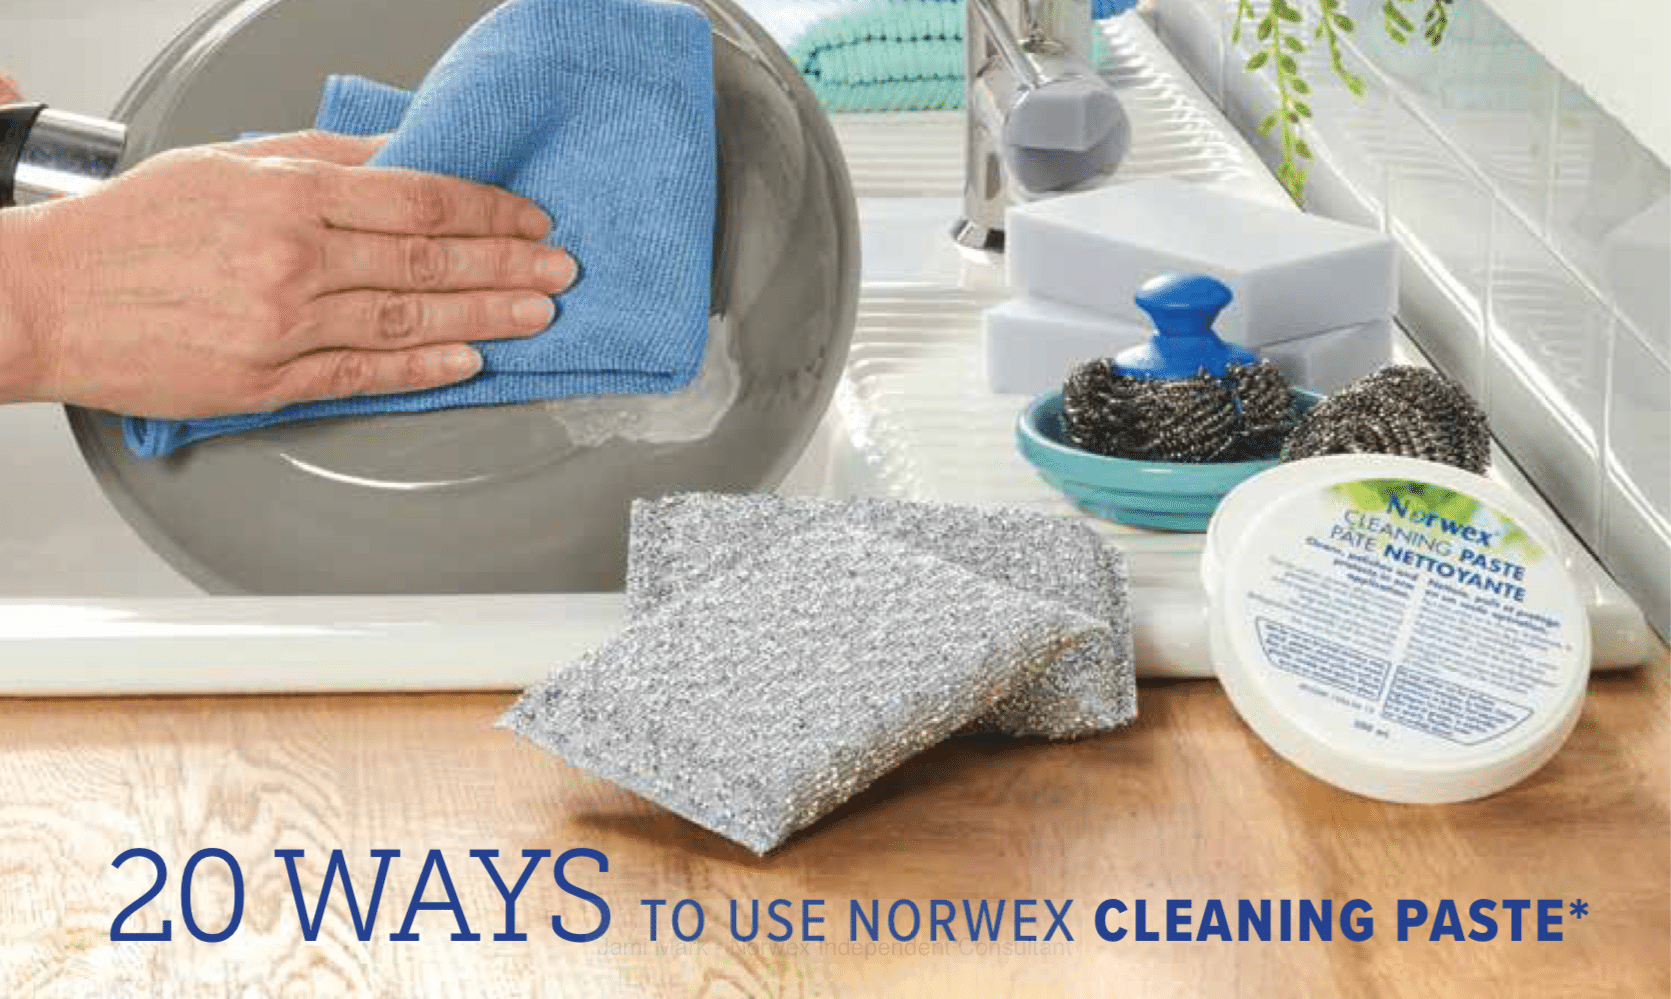 Norwex Cleaning Paste For Grout Cleaning - Work With Water